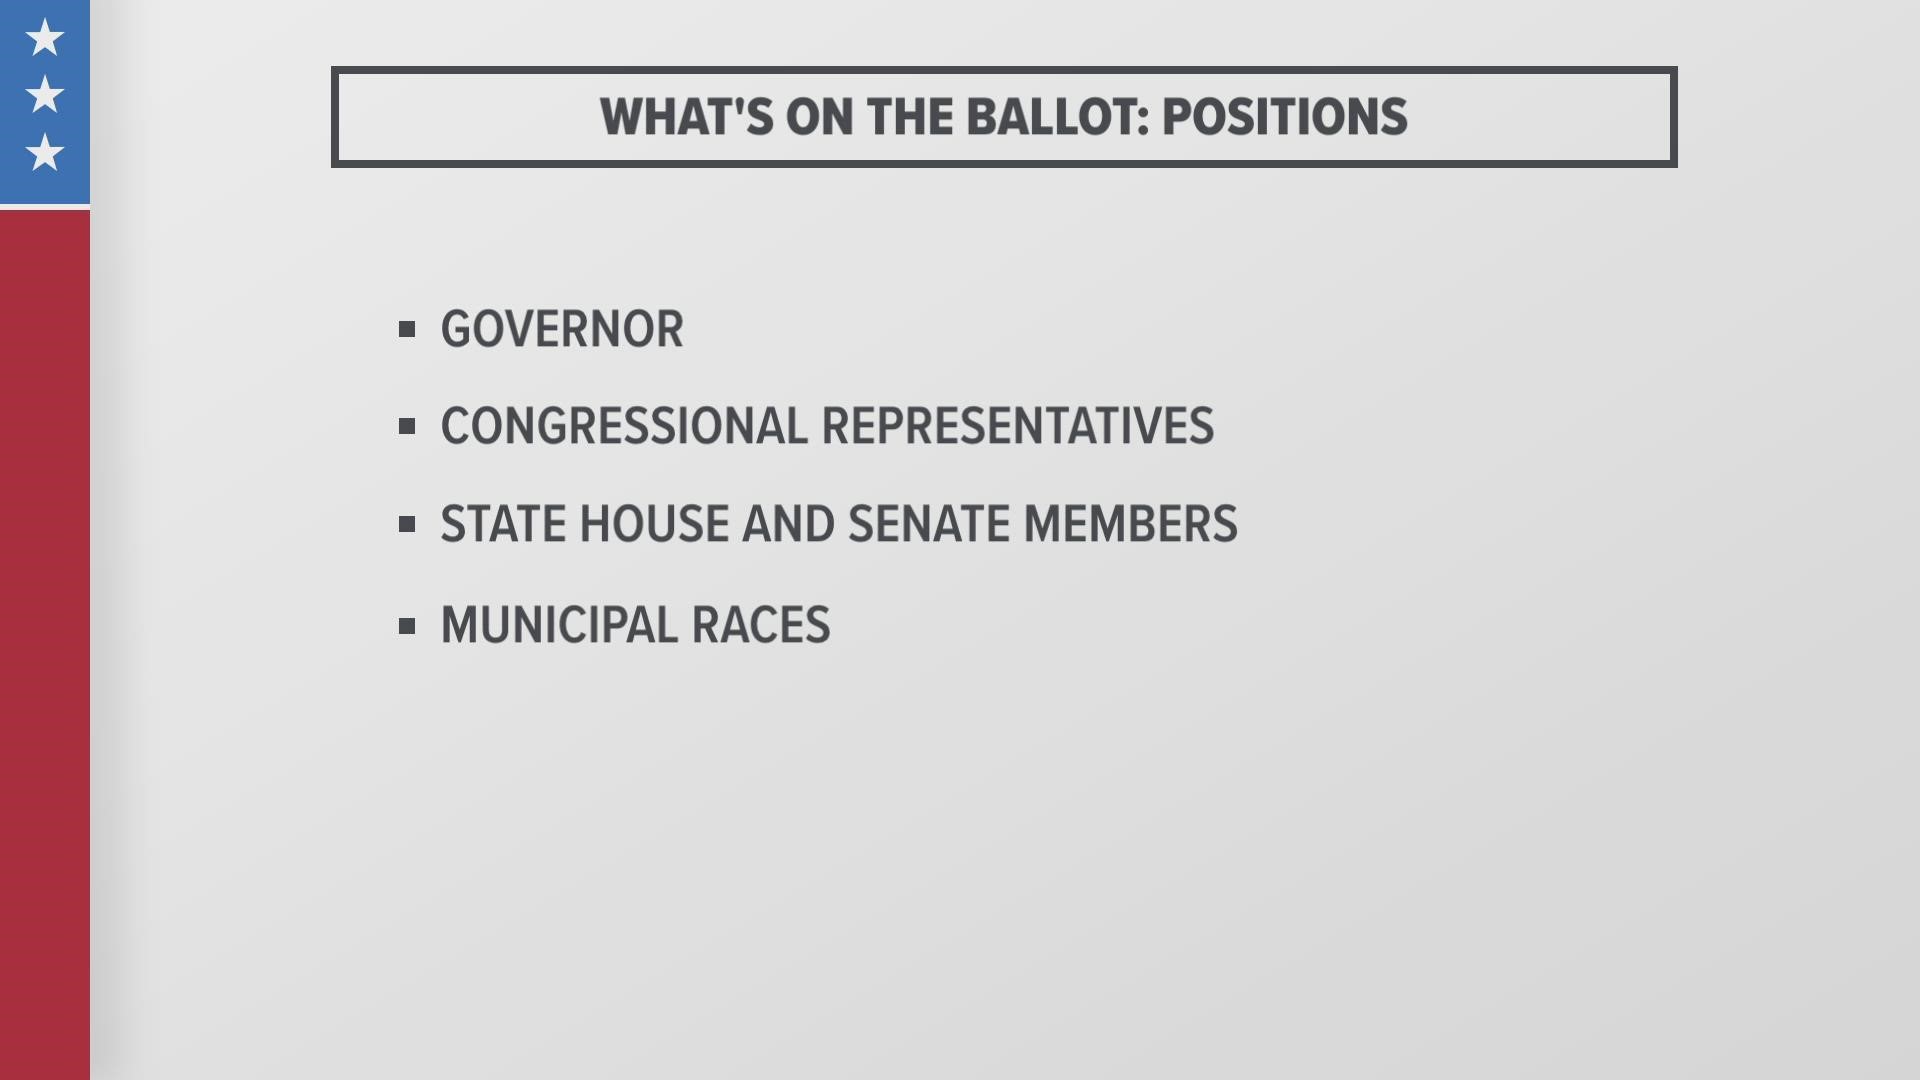 The governor's seat, congressional representatives, state house and senate seats as well as municipal races are on the ballot.